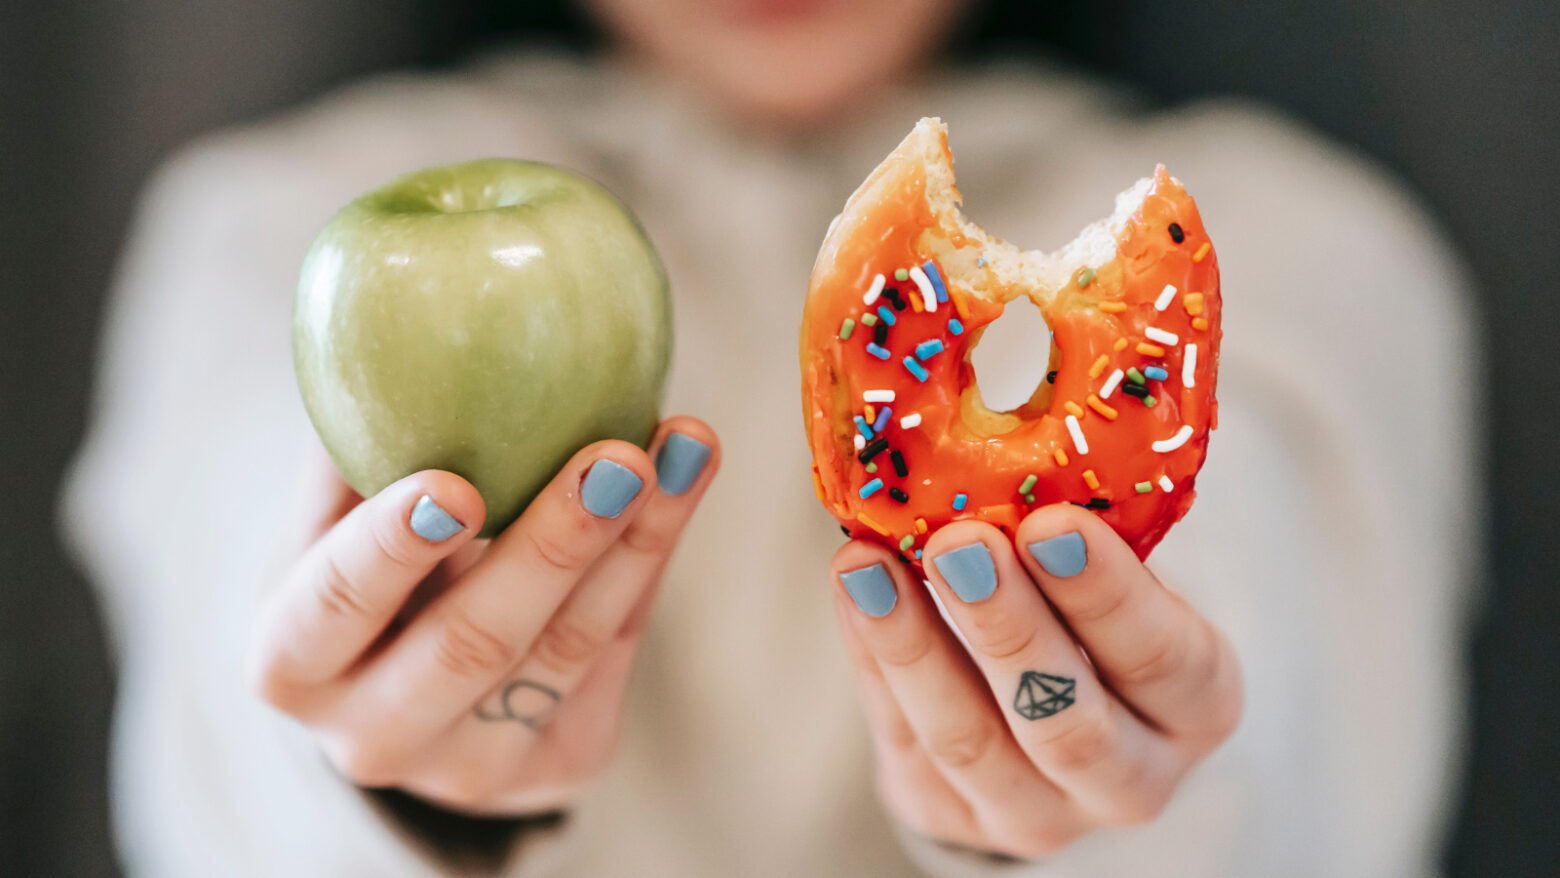 Close-up of a woman holding up a green apple and an orange-frosted donut with a bite taken out of it